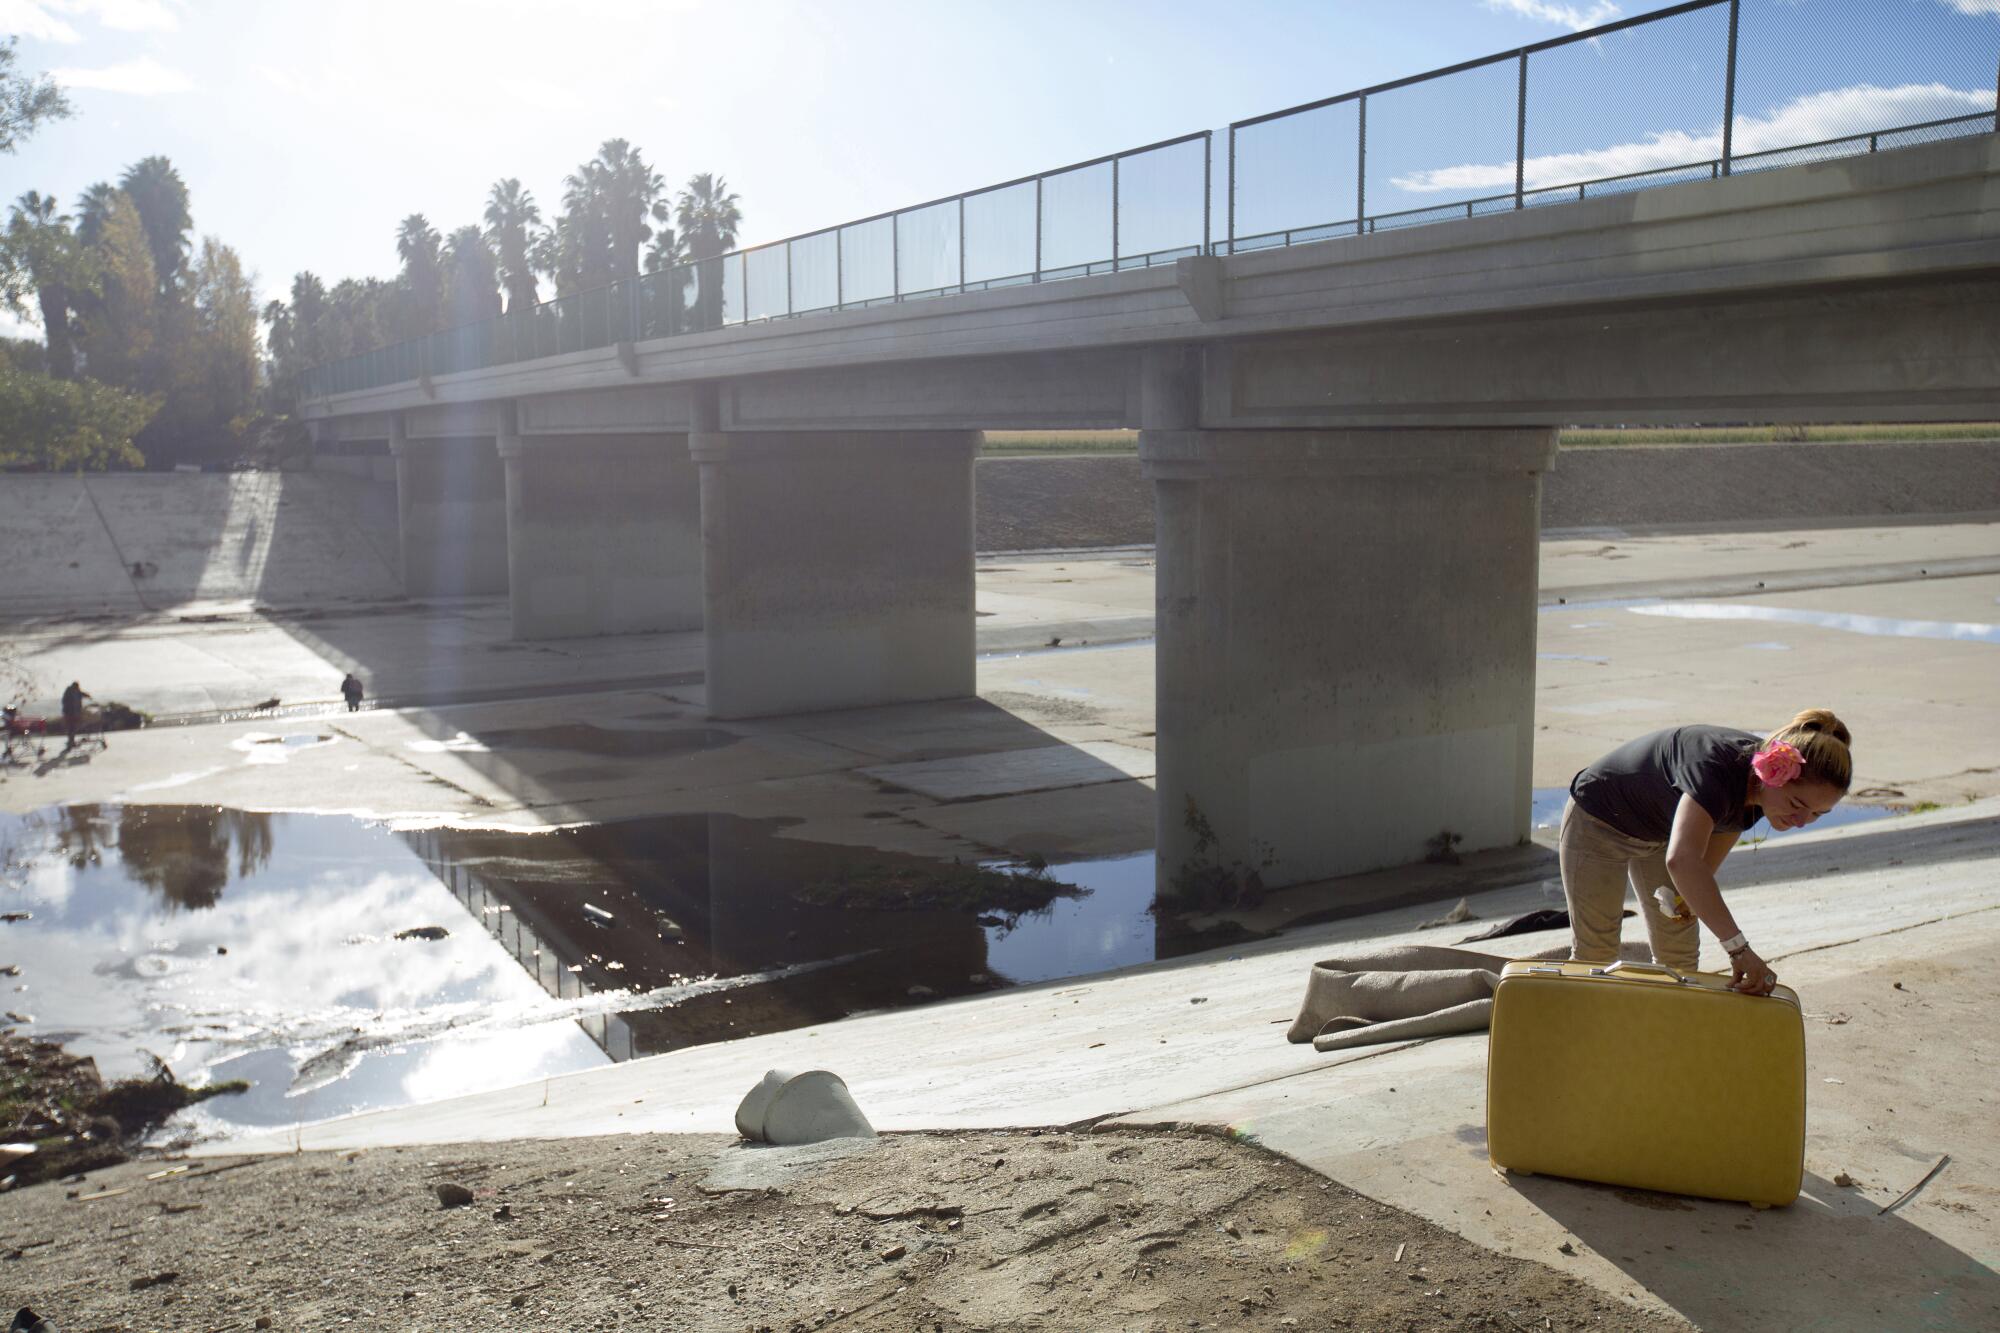 Ashley Heldman, 29, opens a suitcase she found along the L.A. River near a homeless community.